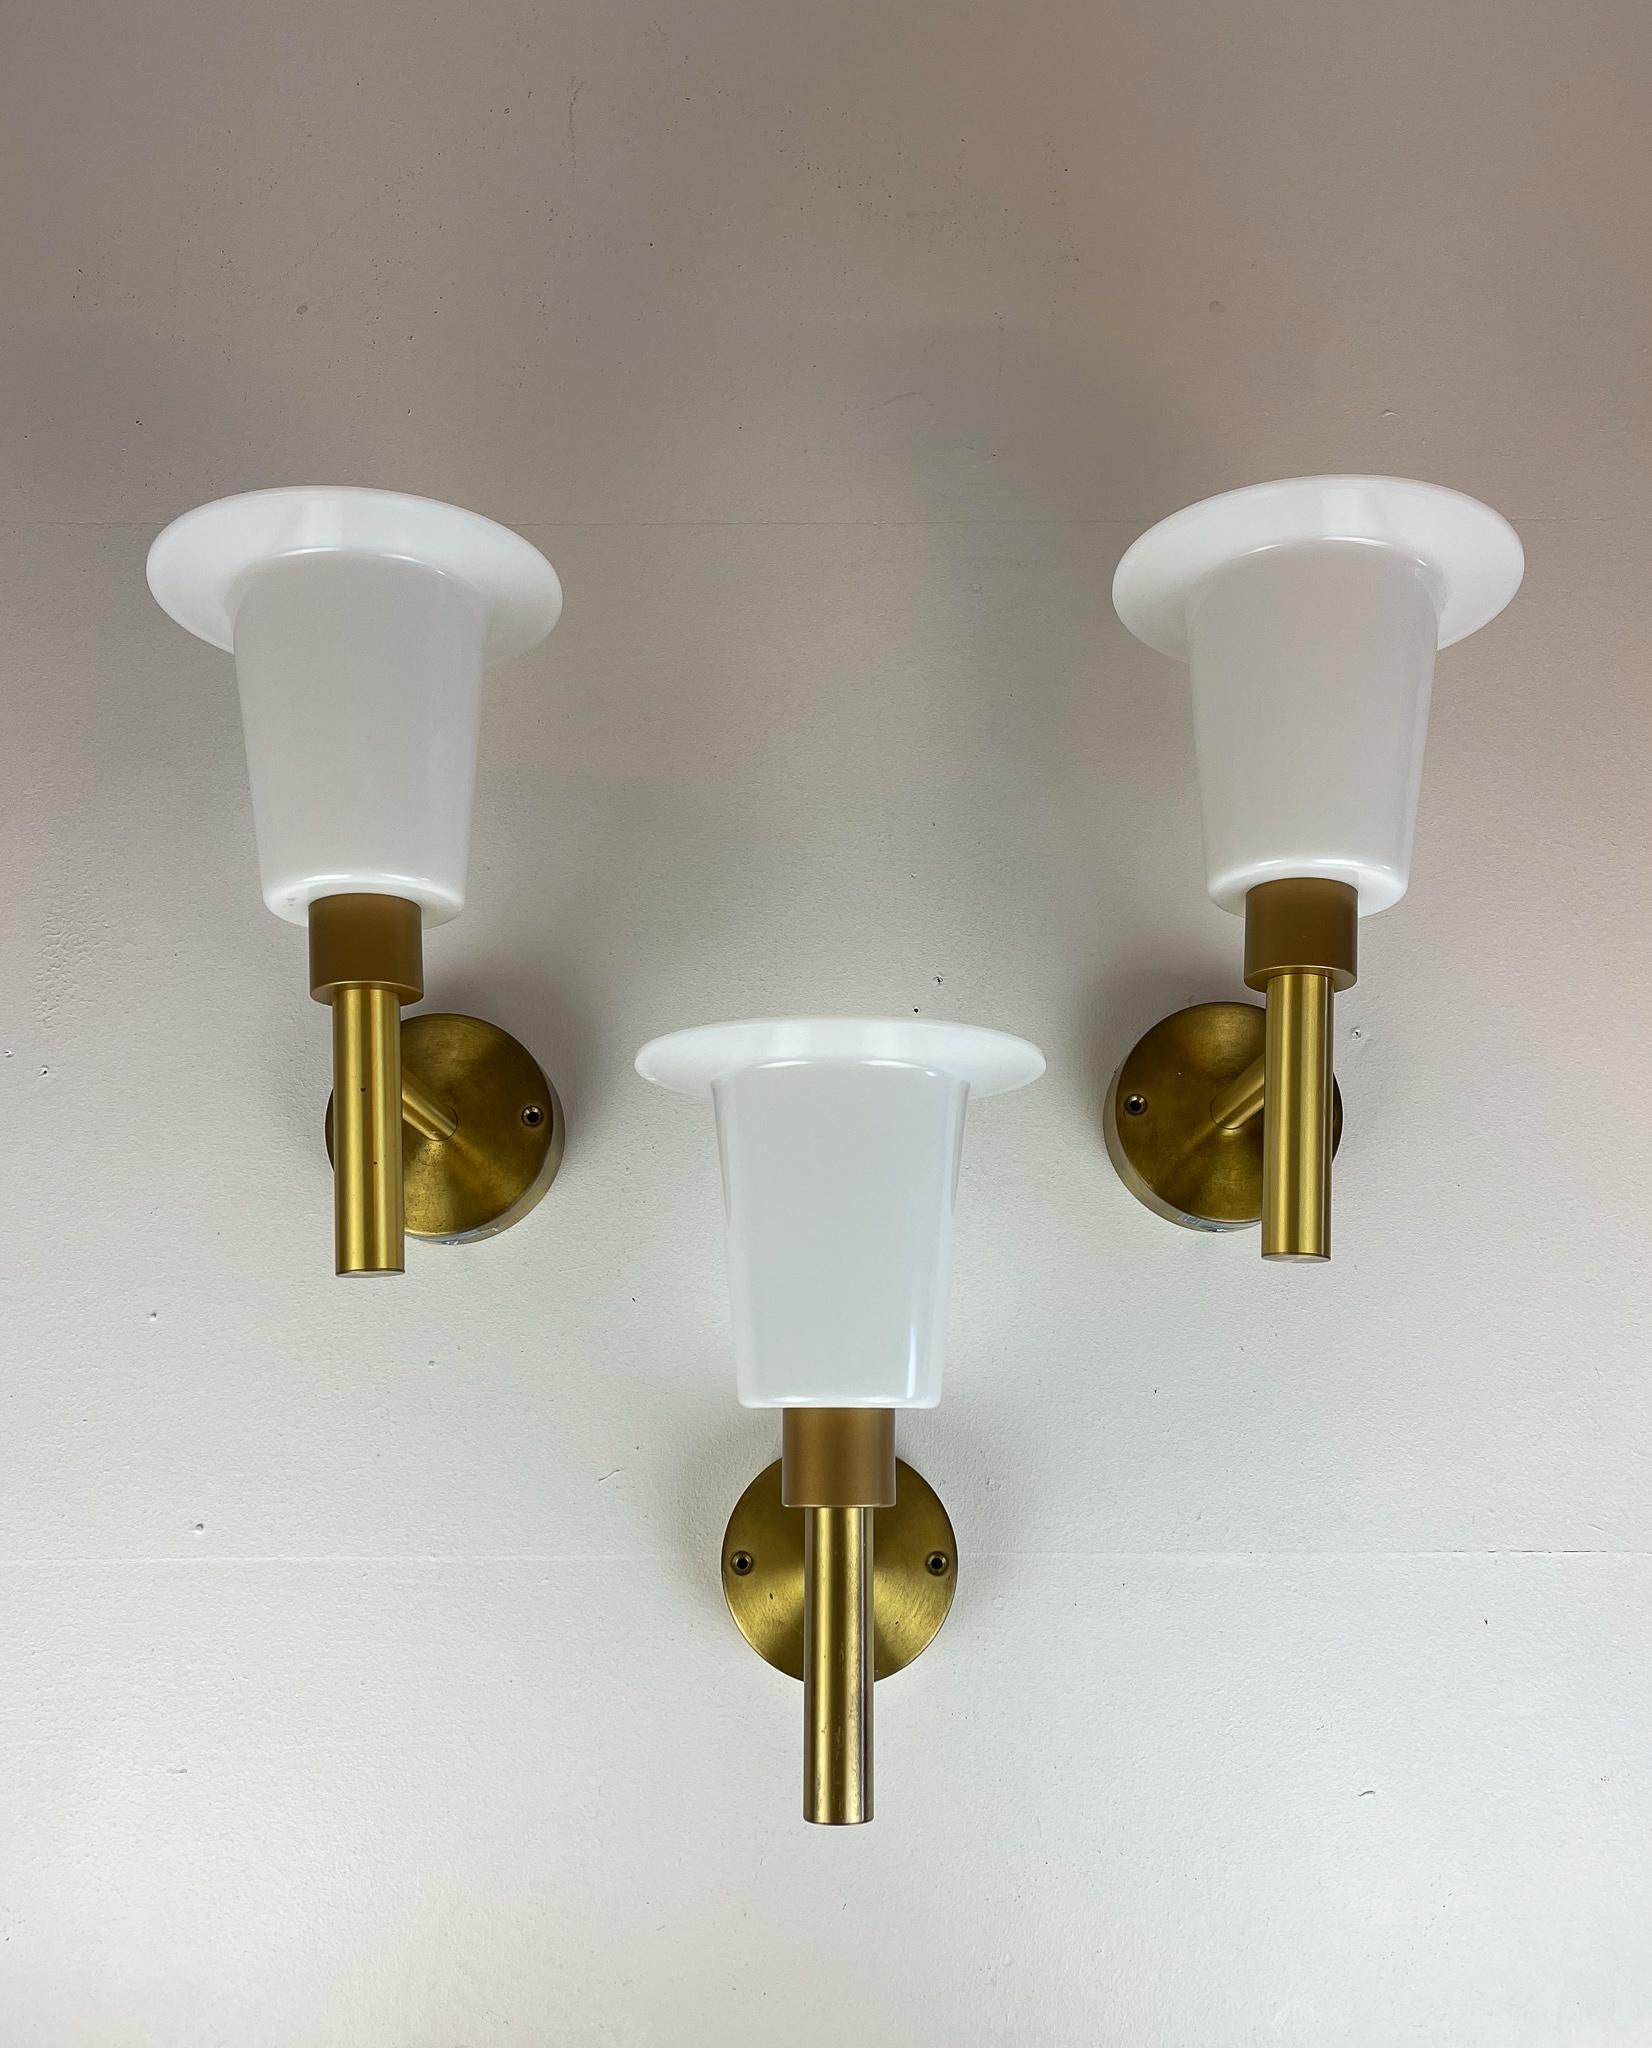 Mid-Century Modern Midcentury Wall-Mounted Brass and Acrylic Lamps Luxus, Sweden, 1960s For Sale